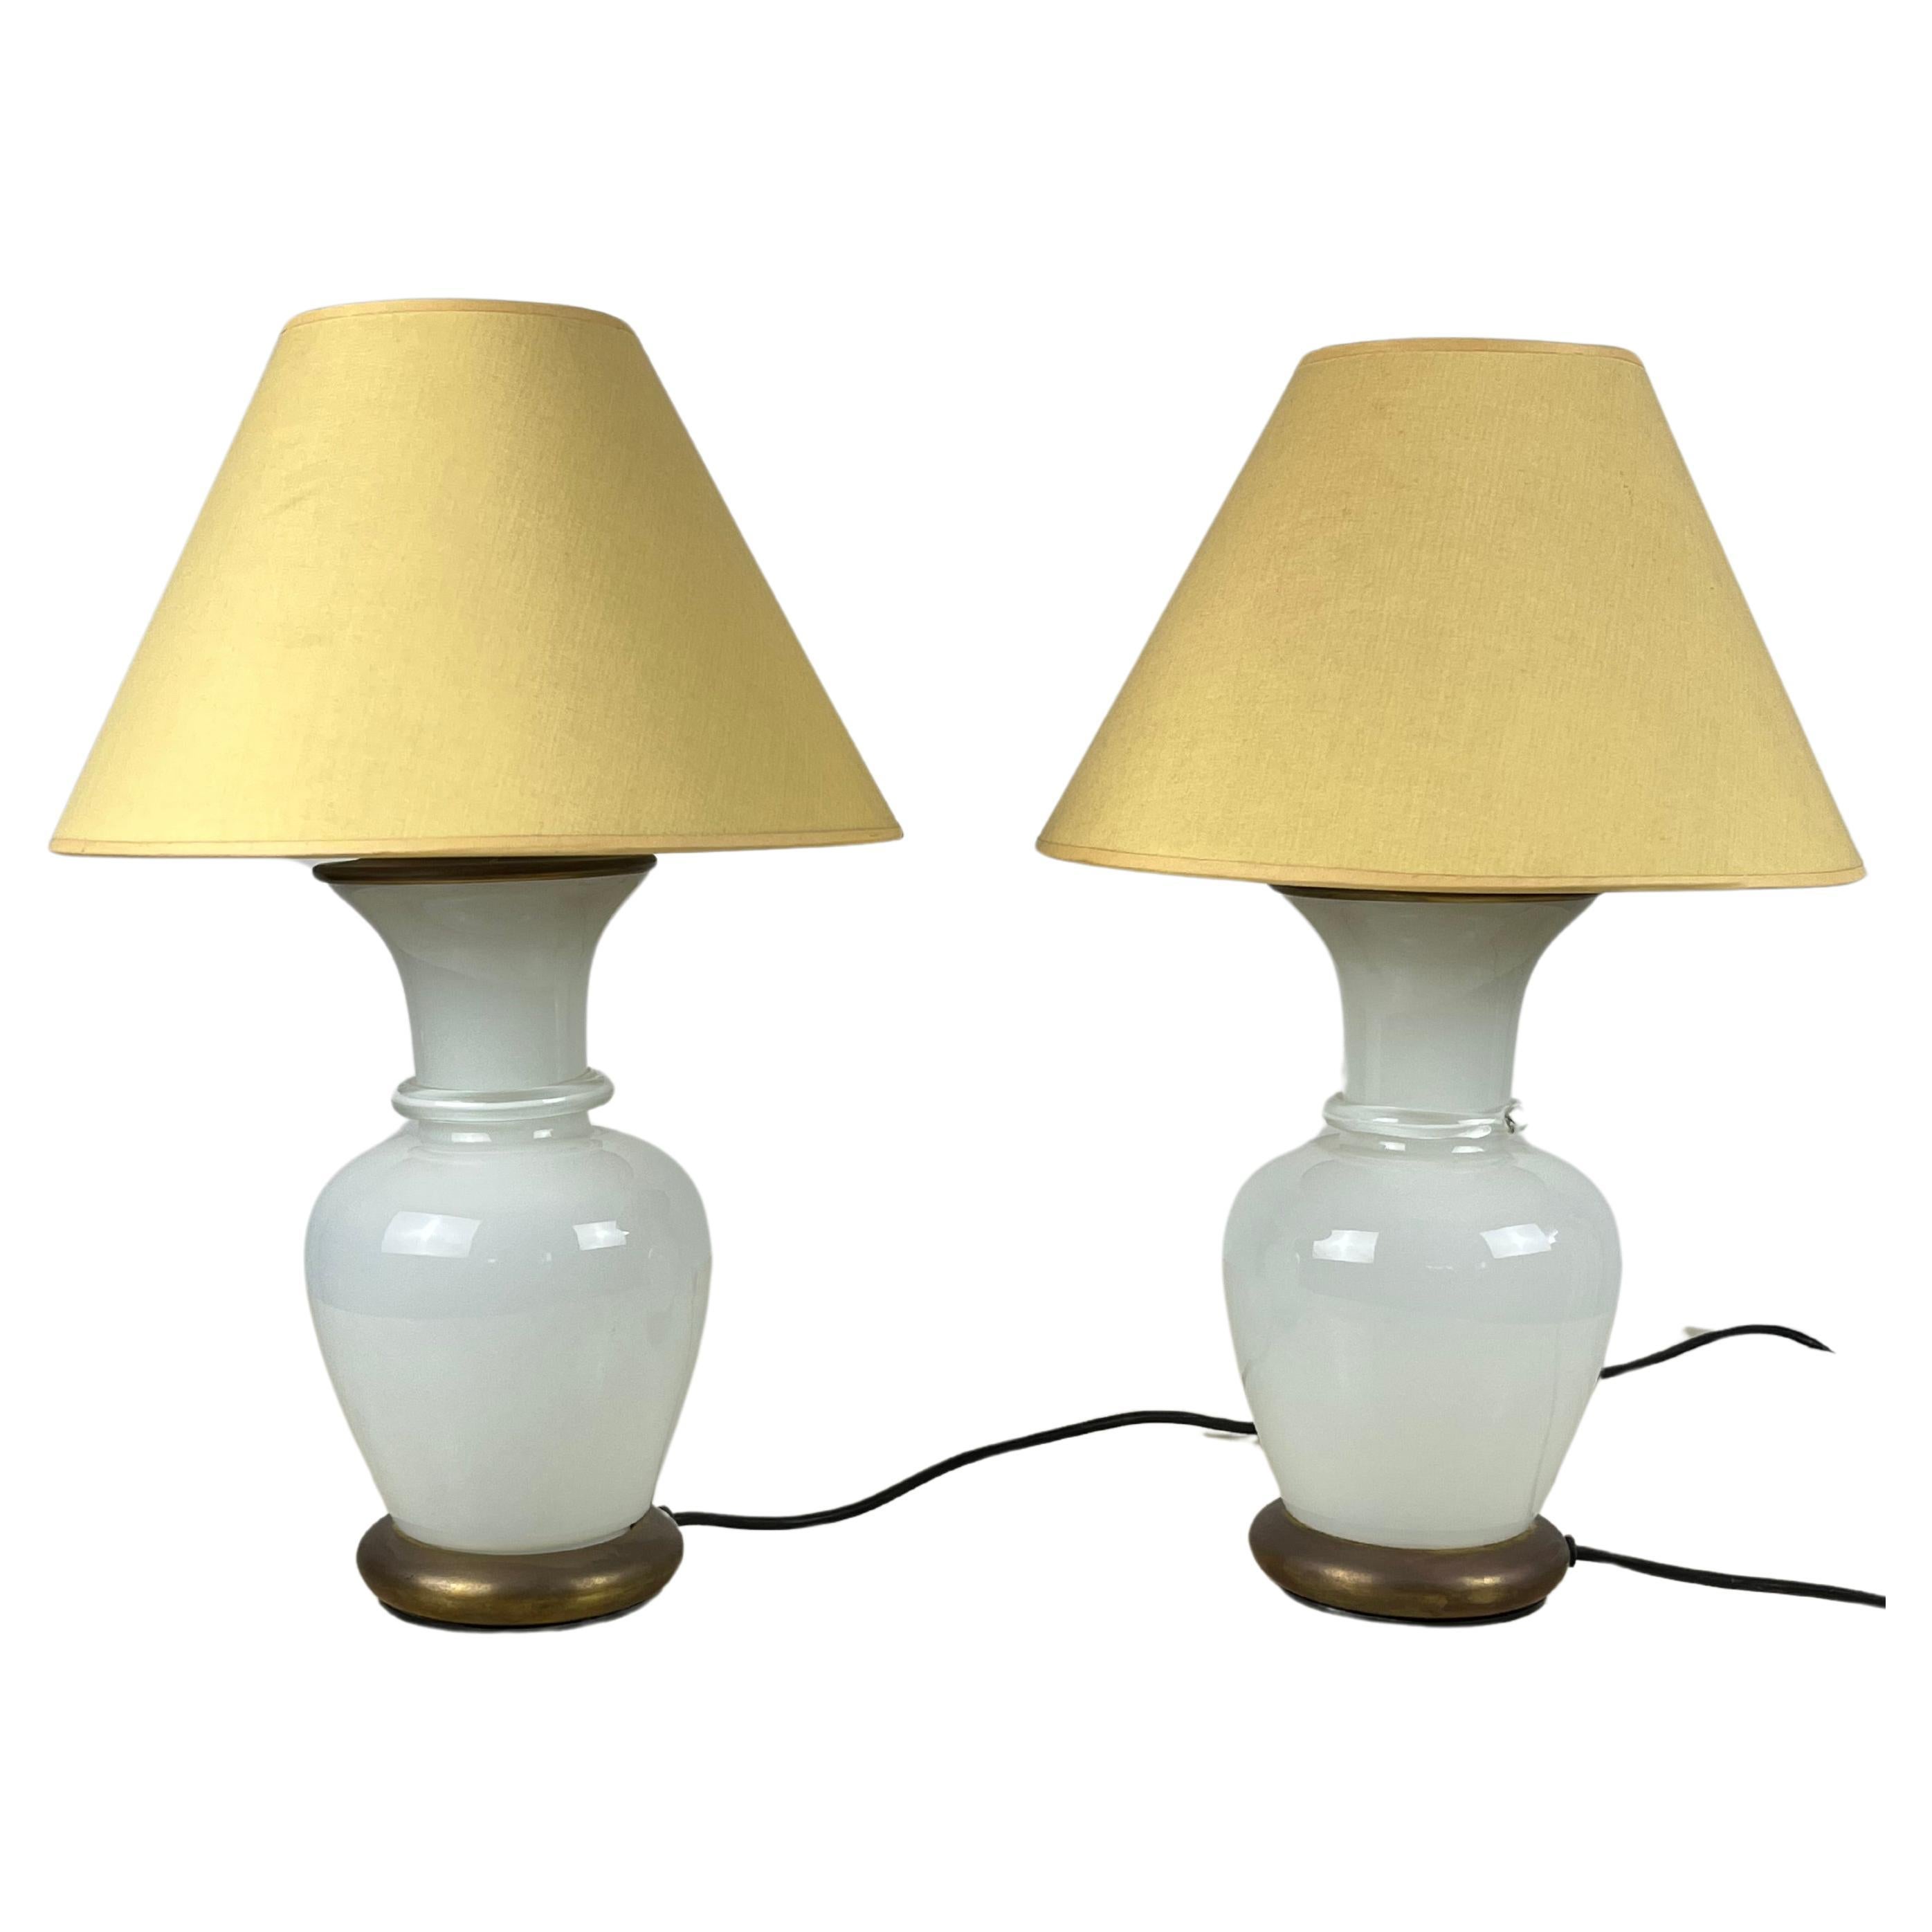 Set of 2 Murano Glass and Brass Table Lamps, F. Fabbian, Italy, 1970s For Sale